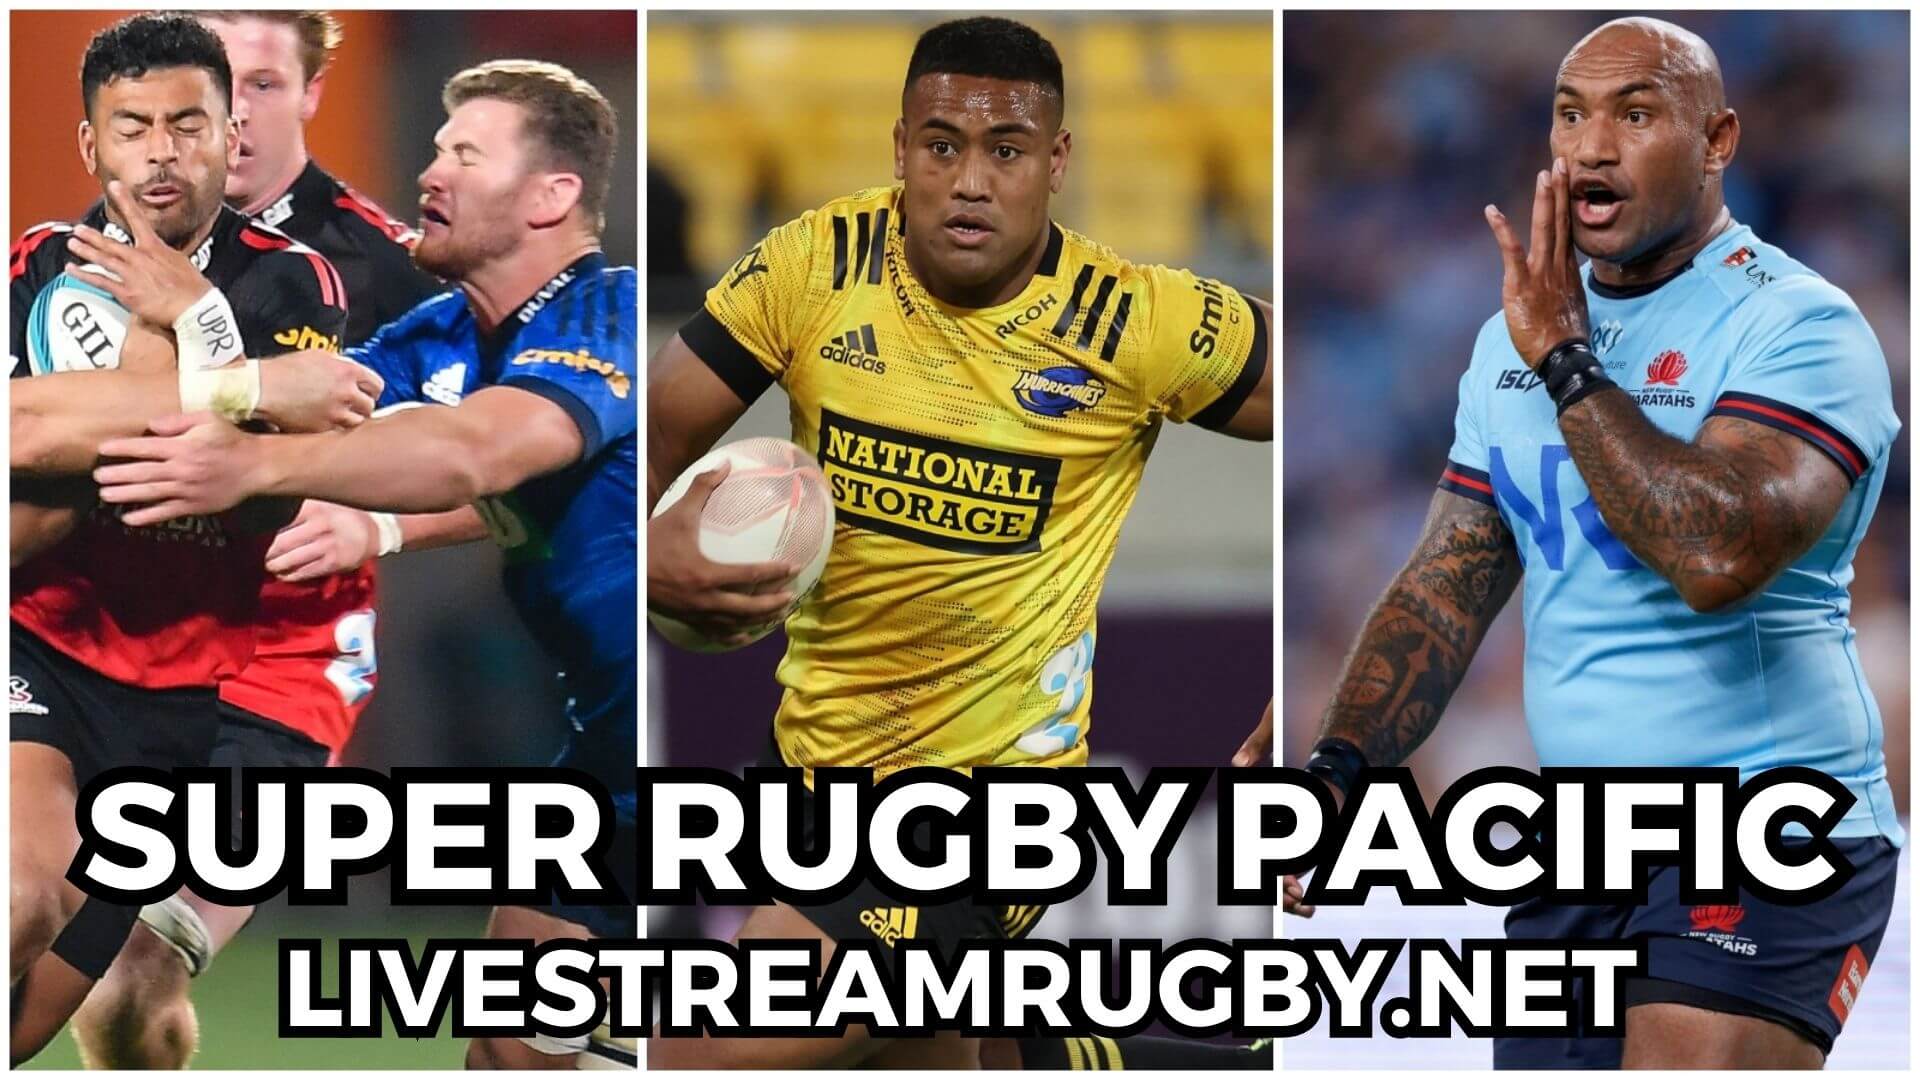 Live Streaming Super Rugby Pacific Online